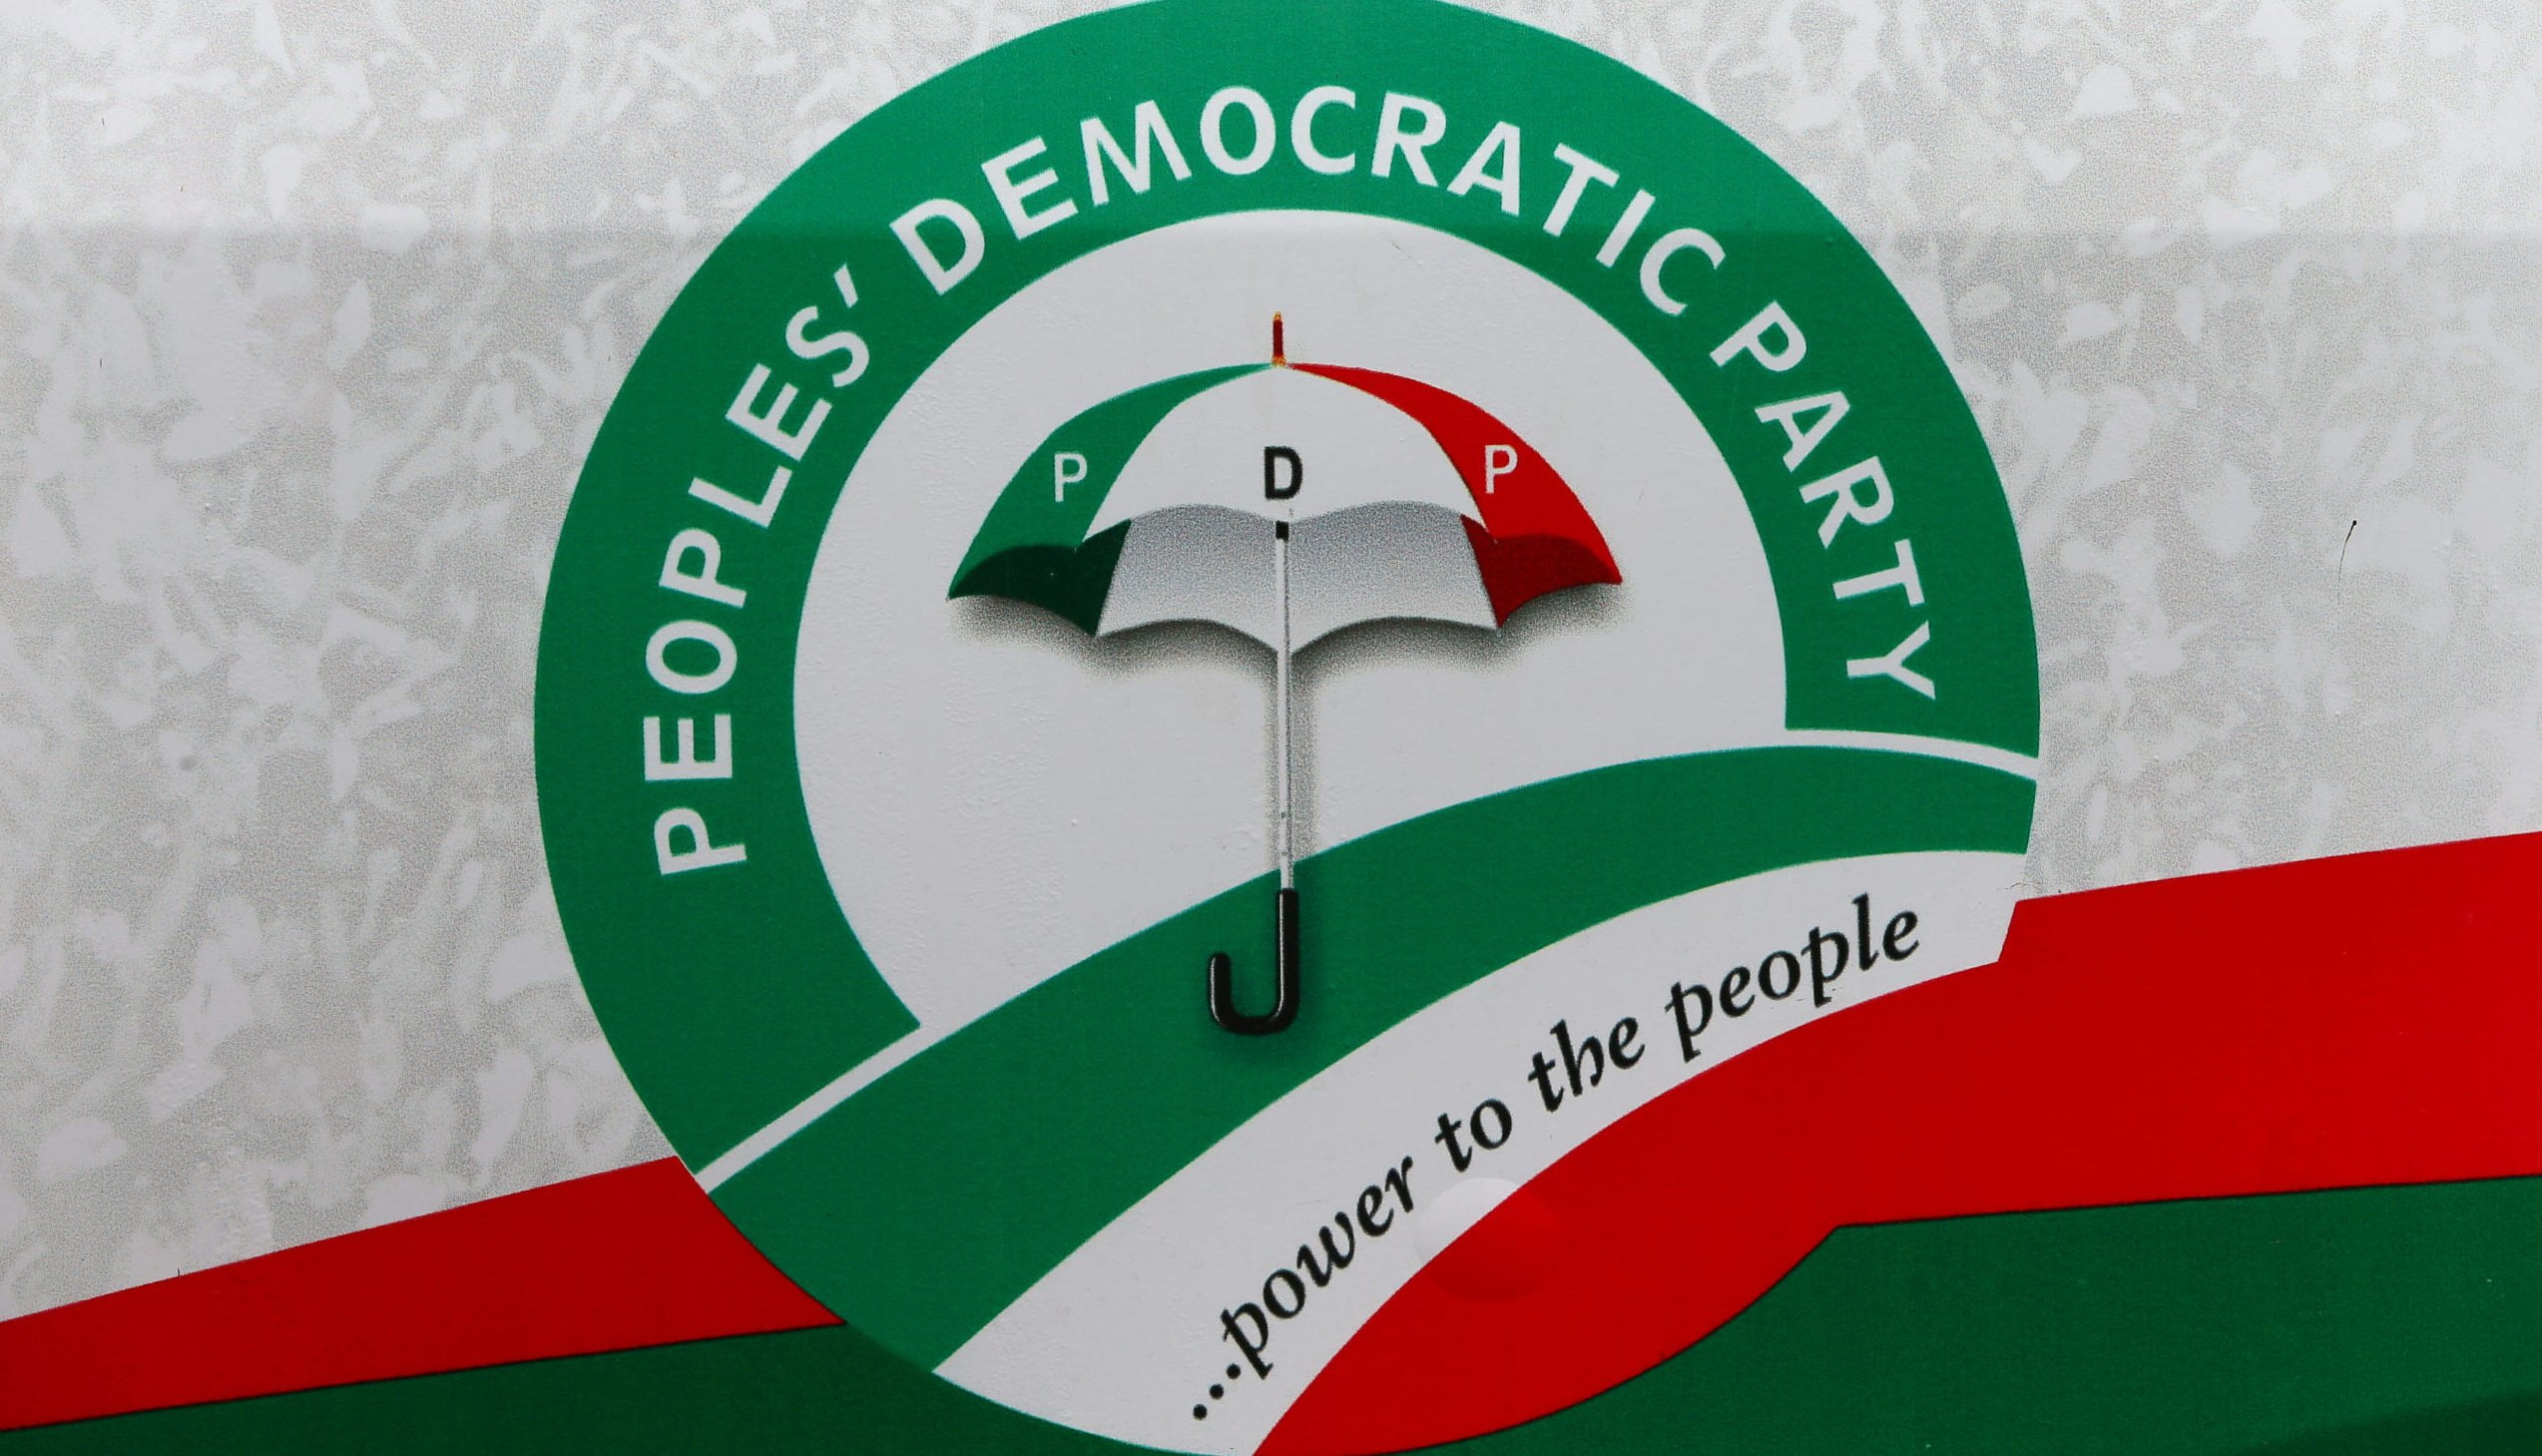 Nigeria Decides: PDP insists on Katsina election results disappointing